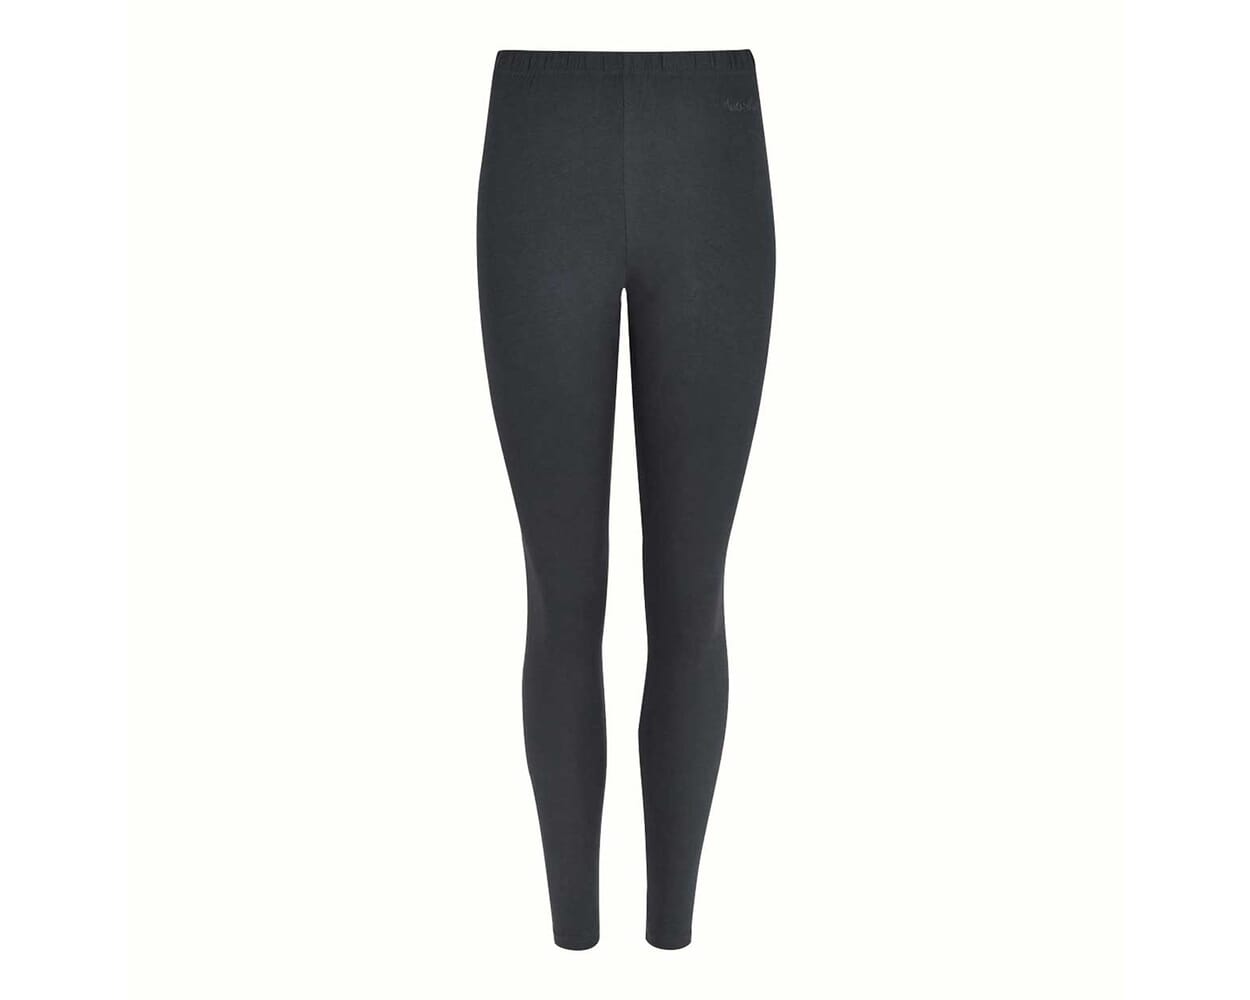 https://assets.thegreenwellystop.co.uk/media/catalog/product/a/u/aug19-weird-fish-louisa-stretch-leggings-washed-black-4_7.jpg?q=80&canvas.width=1250&canvas.height=1000&canvas.color=ffffff&w=1000&h=1000